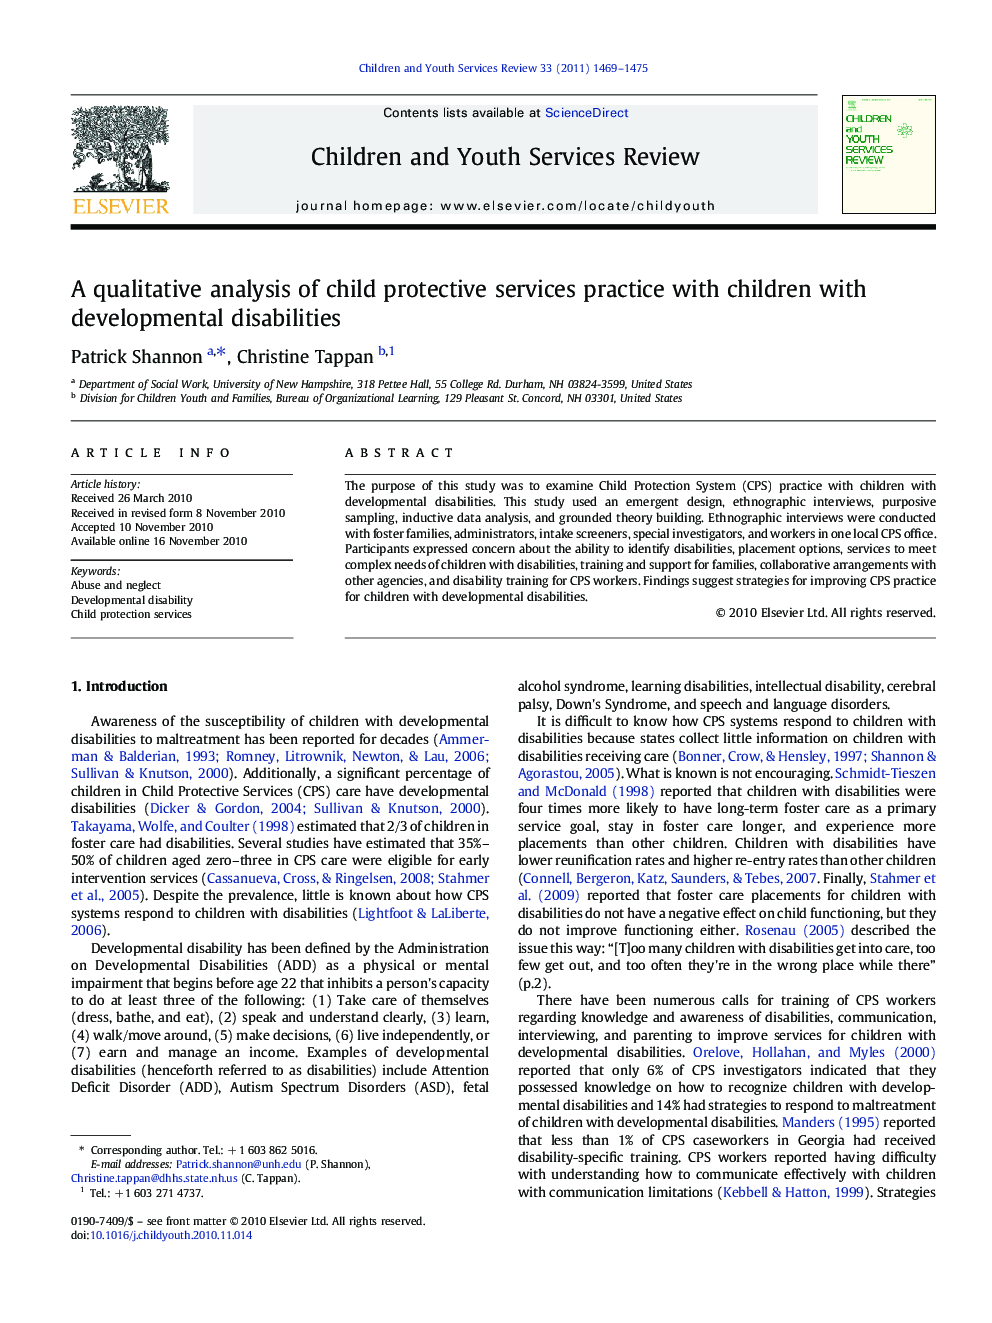 A qualitative analysis of child protective services practice with children with developmental disabilities